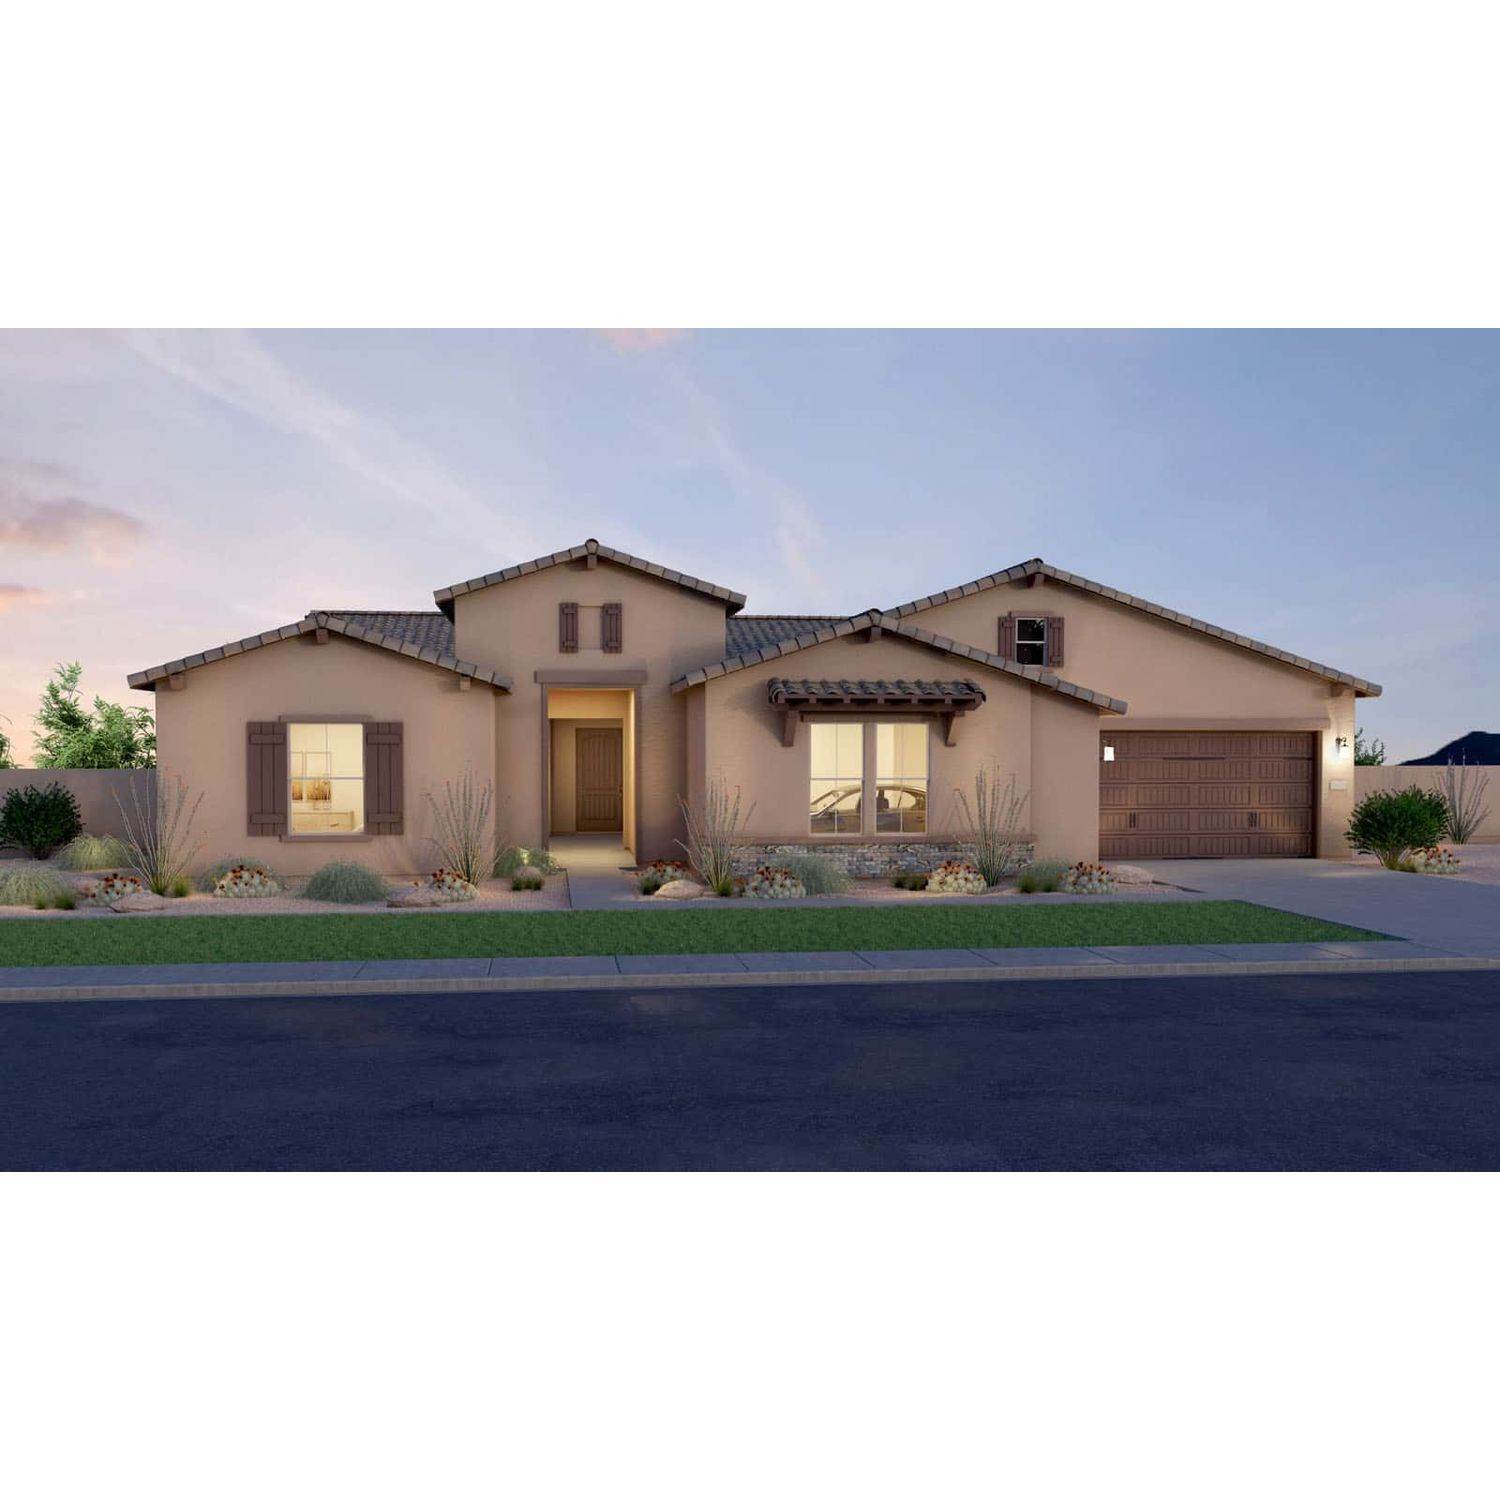 3. Single Family for Sale at Preserve At Sedella 18102 W Highland Ave., Goodyear, AZ 85395